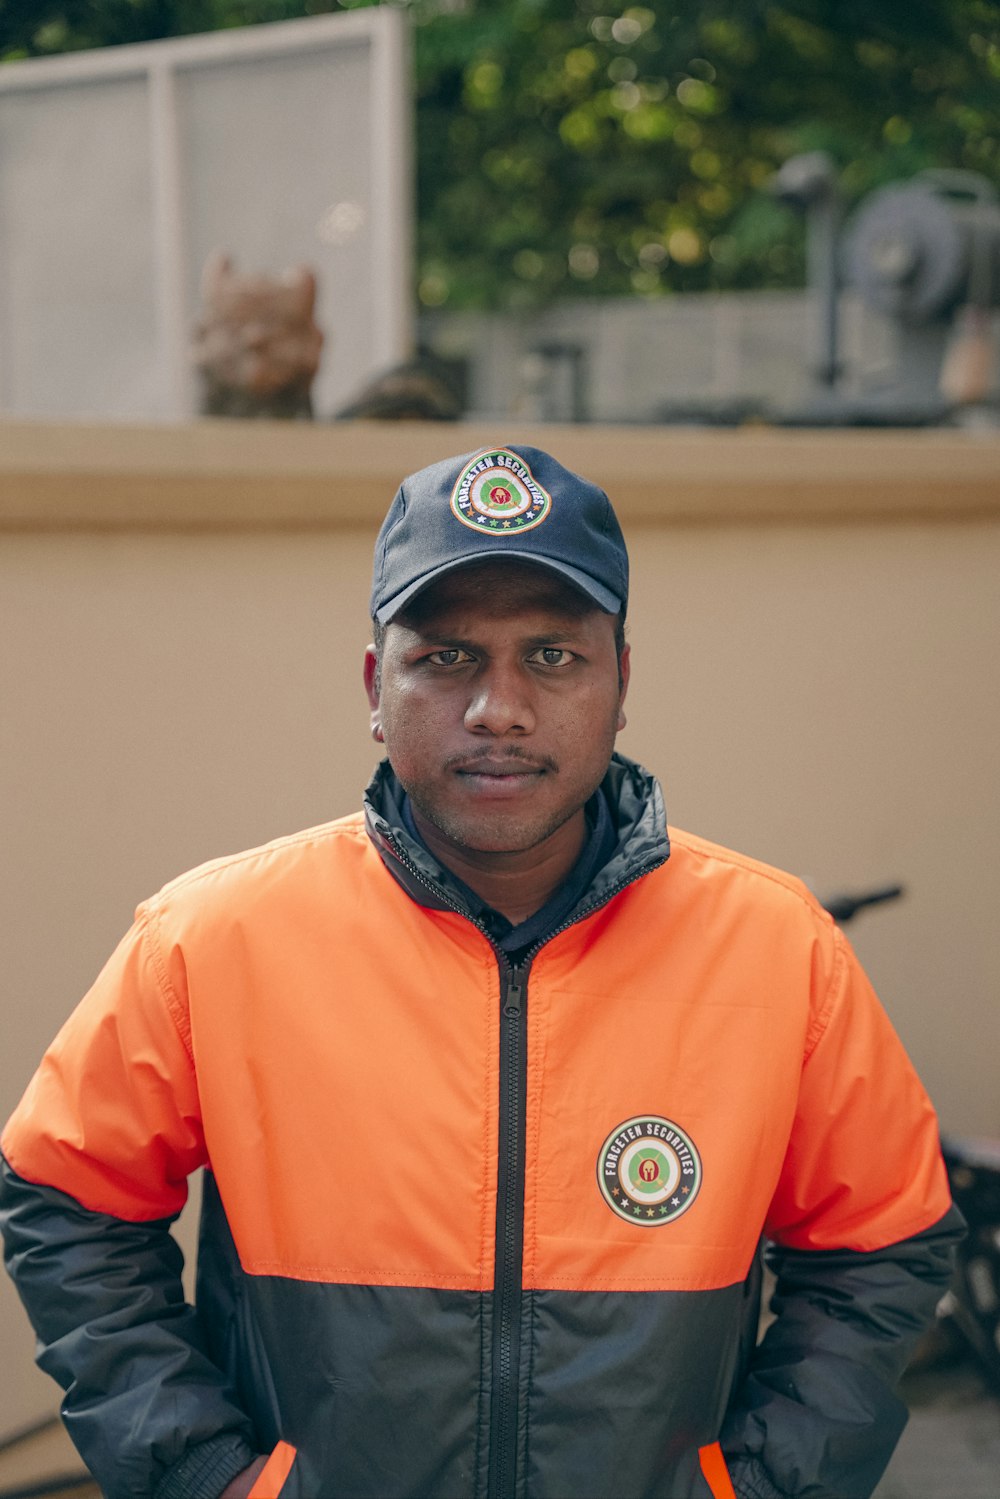 a man wearing an orange and black jacket and hat